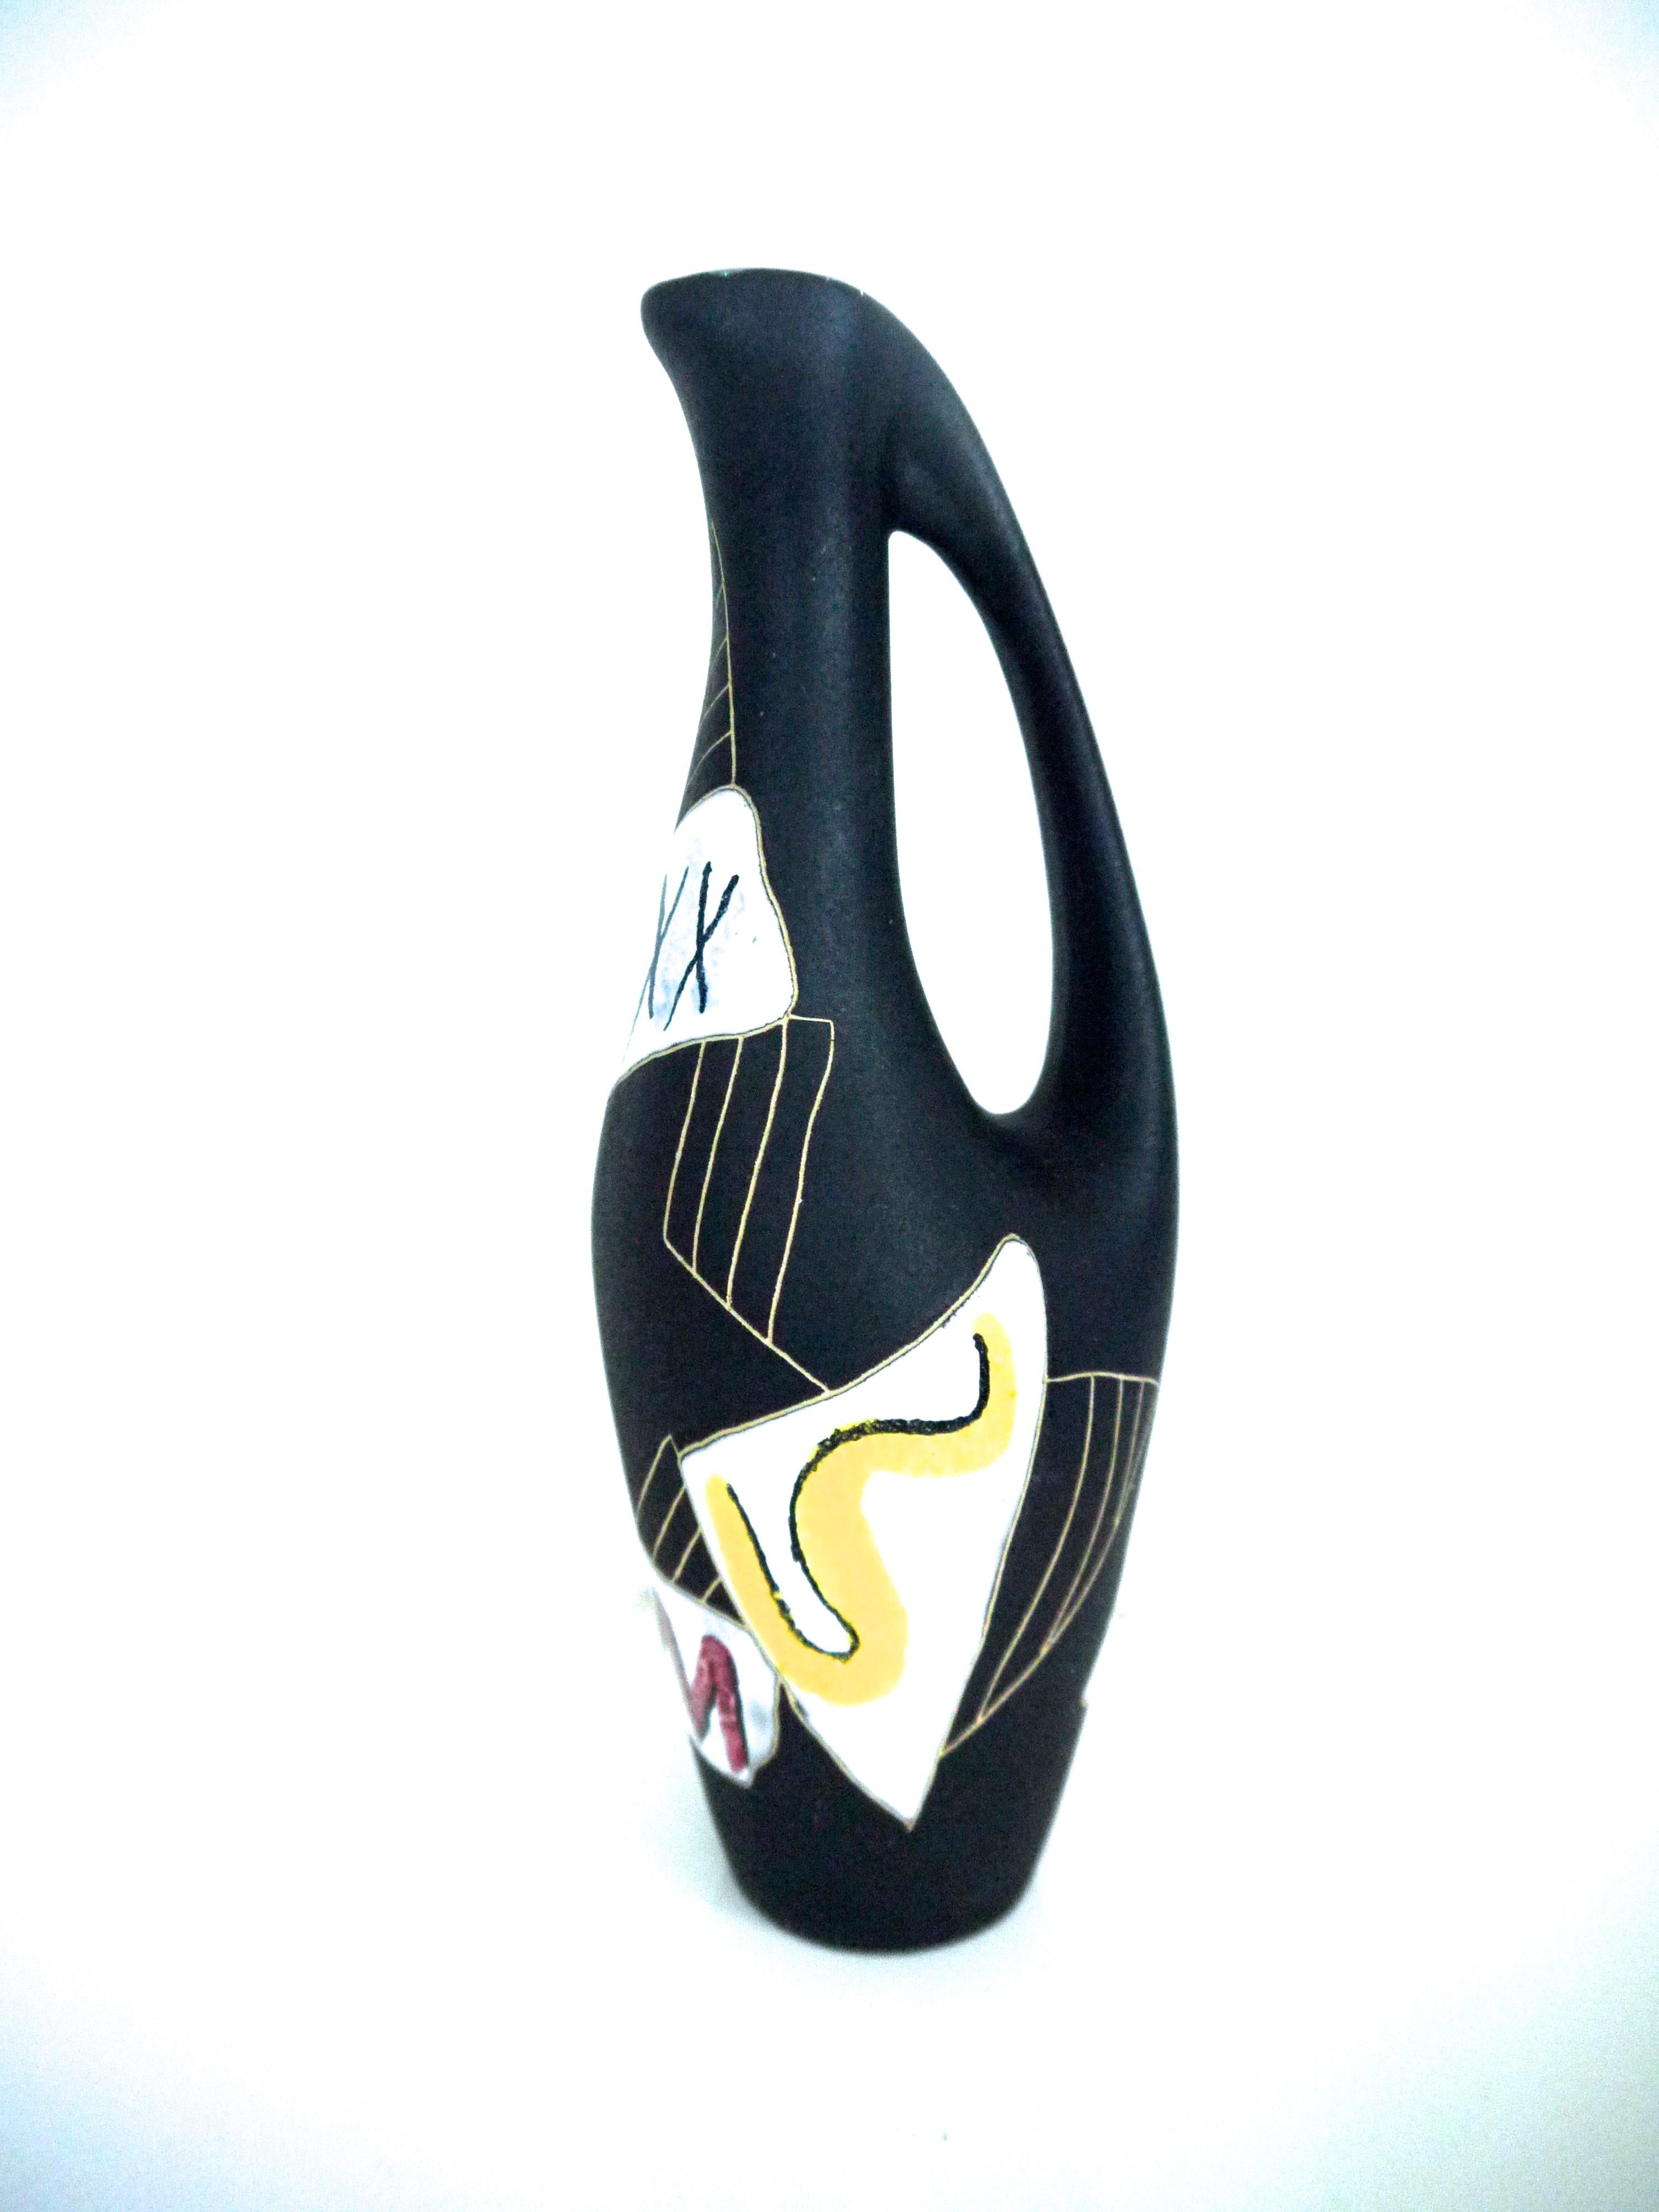 Bauhaus German Modernist Hand Painted Ceramic Pitcher 'small' 'Morroco' Design, 1950s For Sale